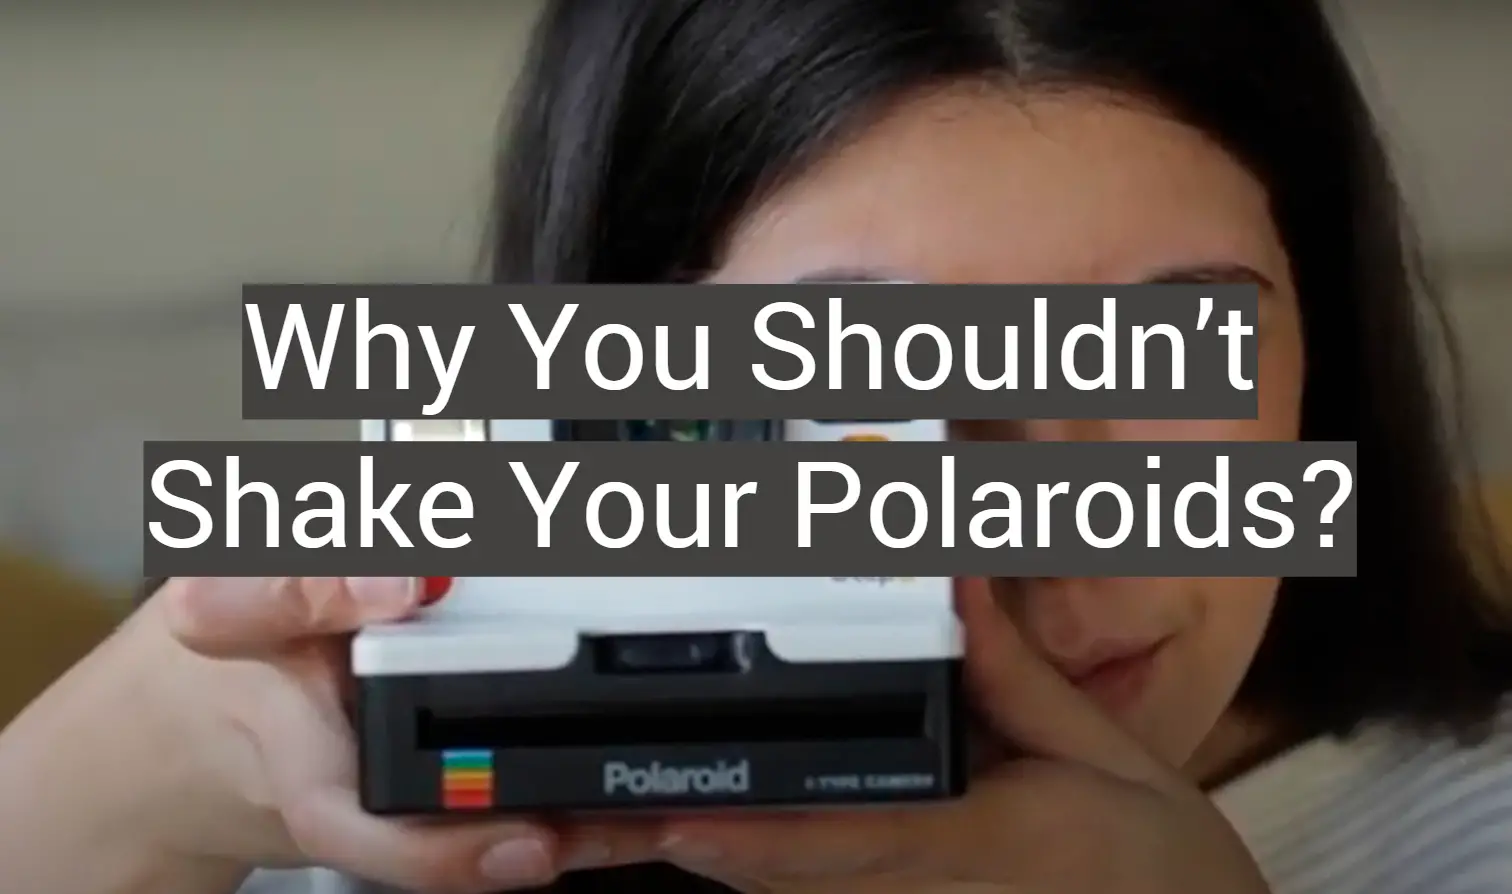 Why You Shouldn’t Shake Your Polaroids?